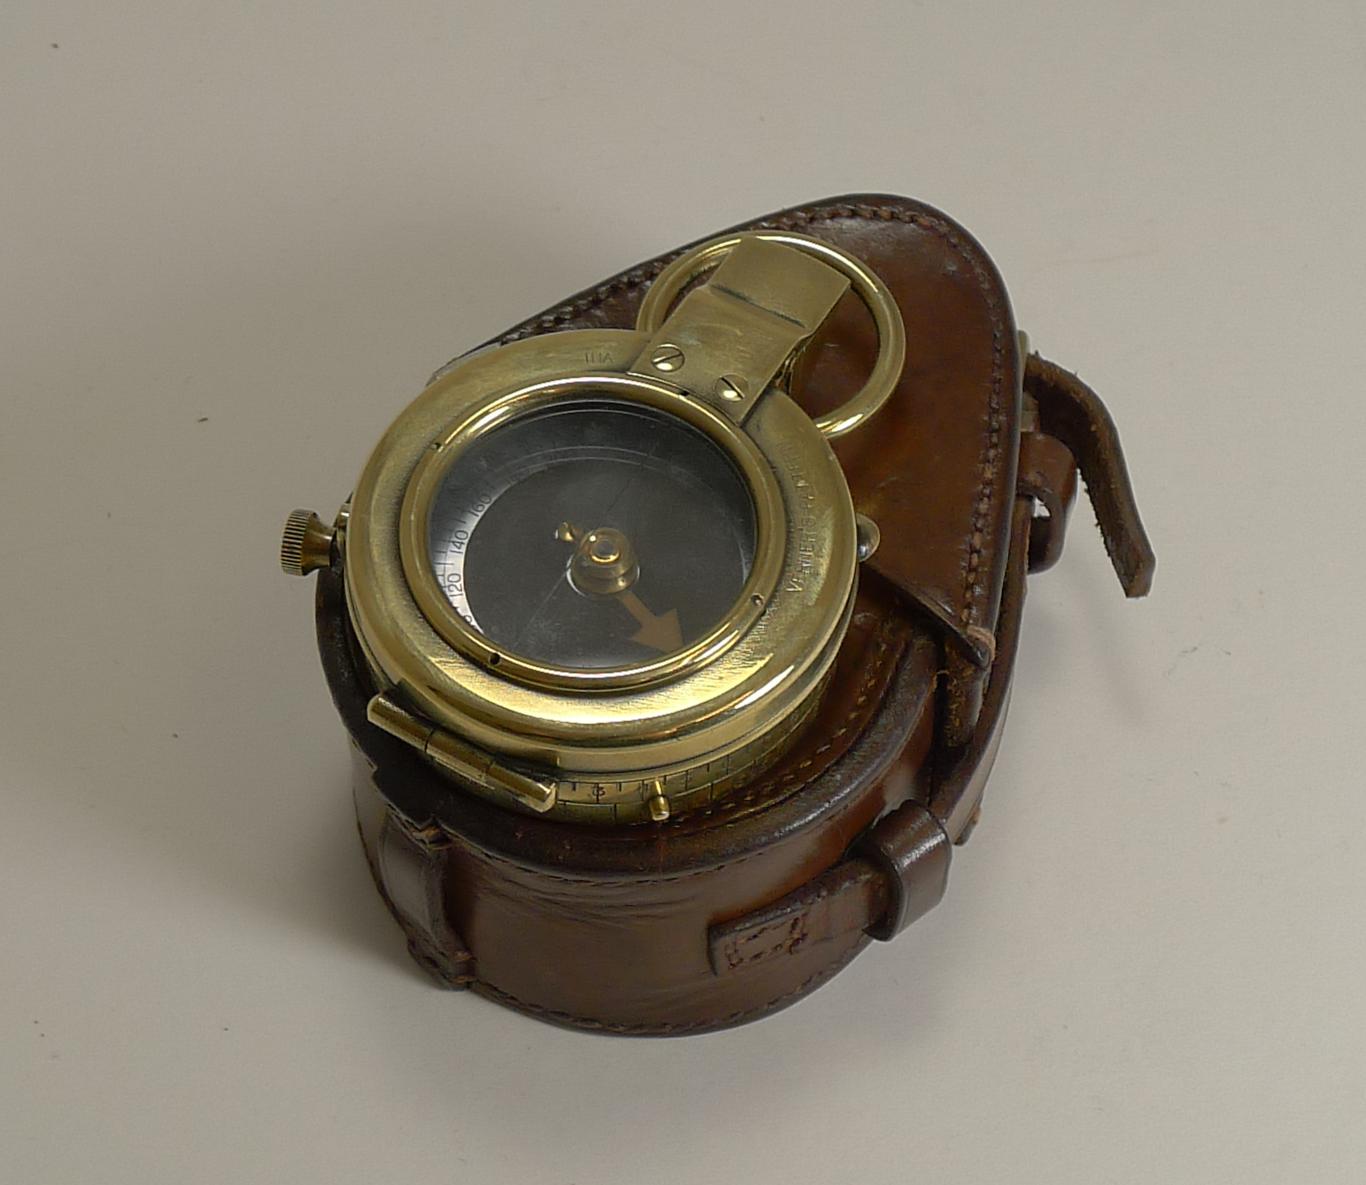 This is an excellent original example of the MK VIII. It is fully functioning, has a brass case and is mounted with lanyard ring. The glass face and numbered brass outer ring are perfectly intact. The lid is stamped 'Verner's Patent VIII. The rear